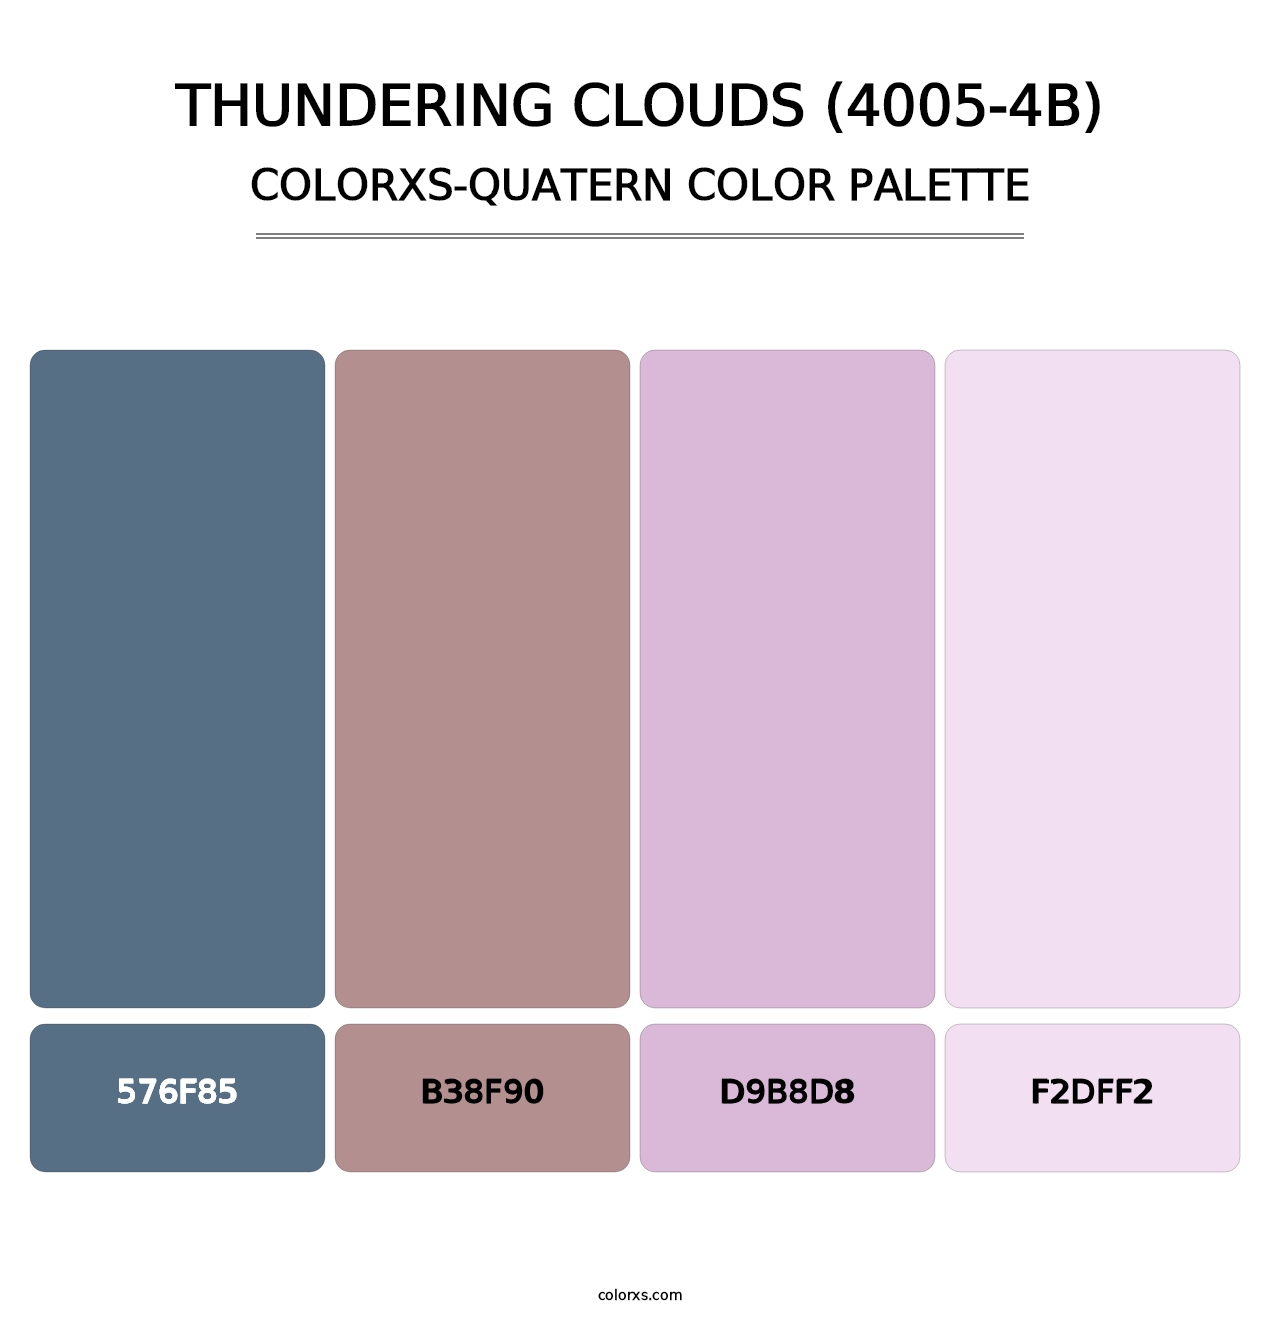 Thundering Clouds (4005-4B) - Colorxs Quatern Palette